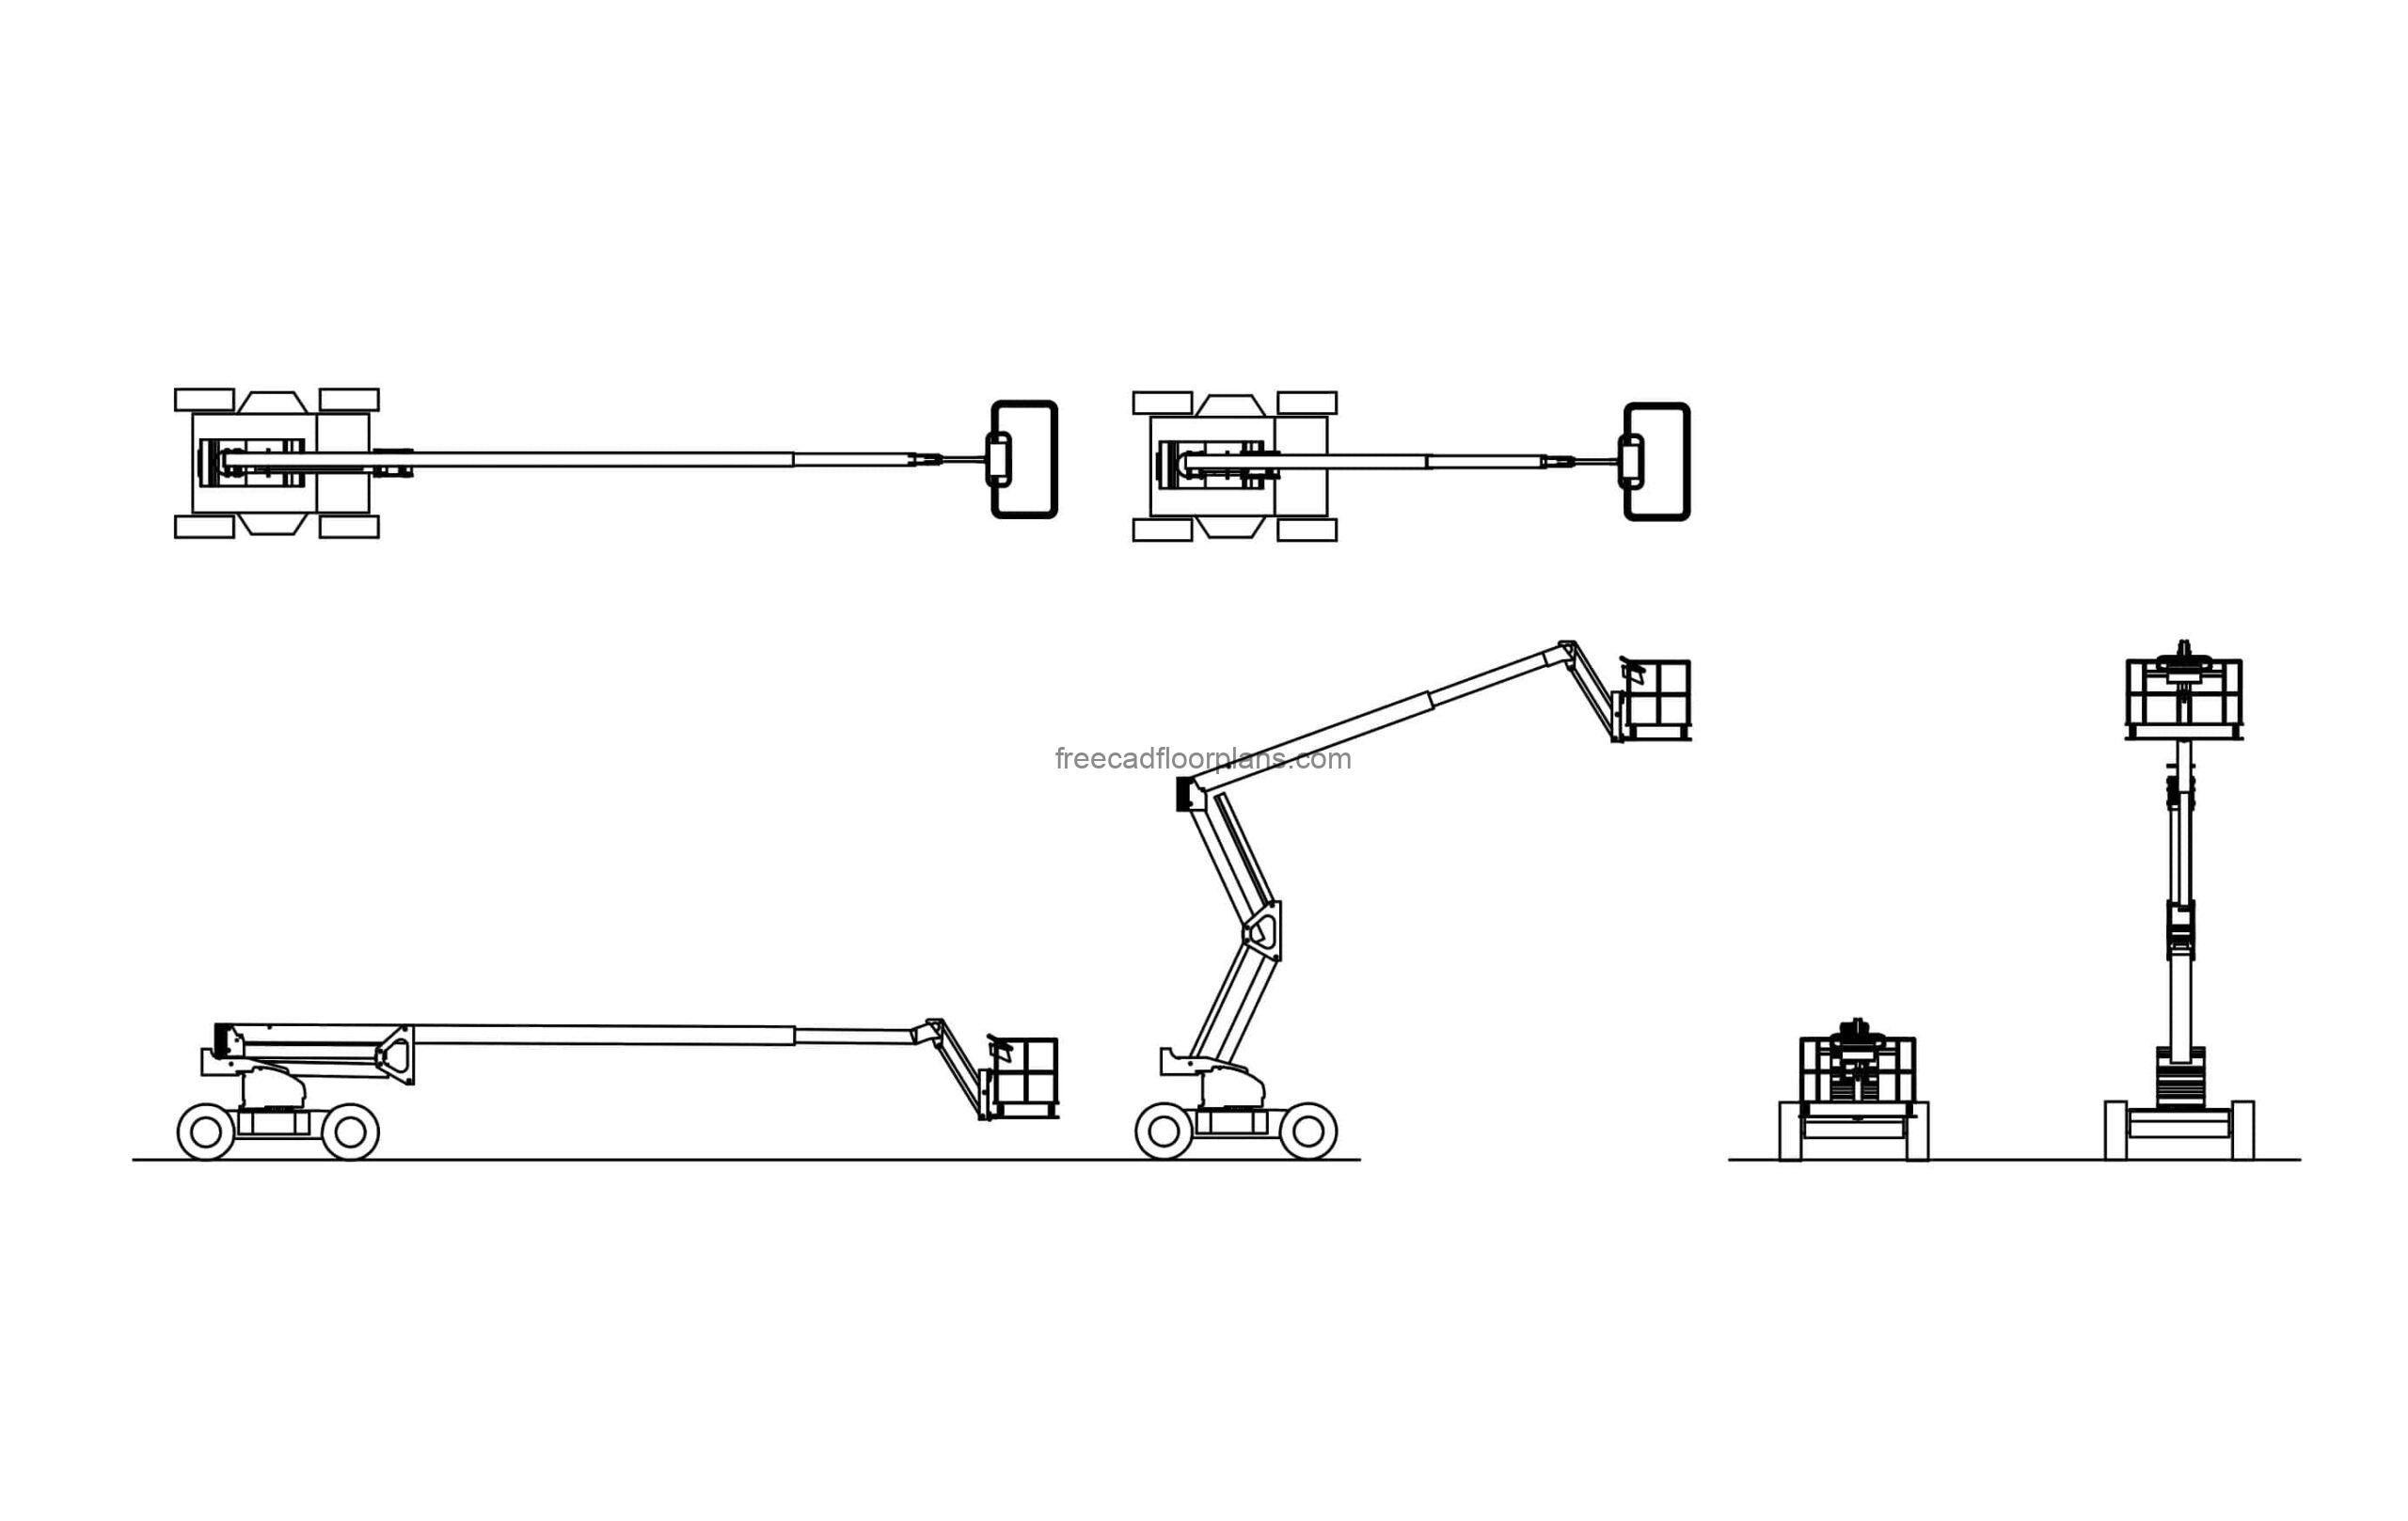 dwg cad block of a cherry picker plan and elevations views autocad file for free download